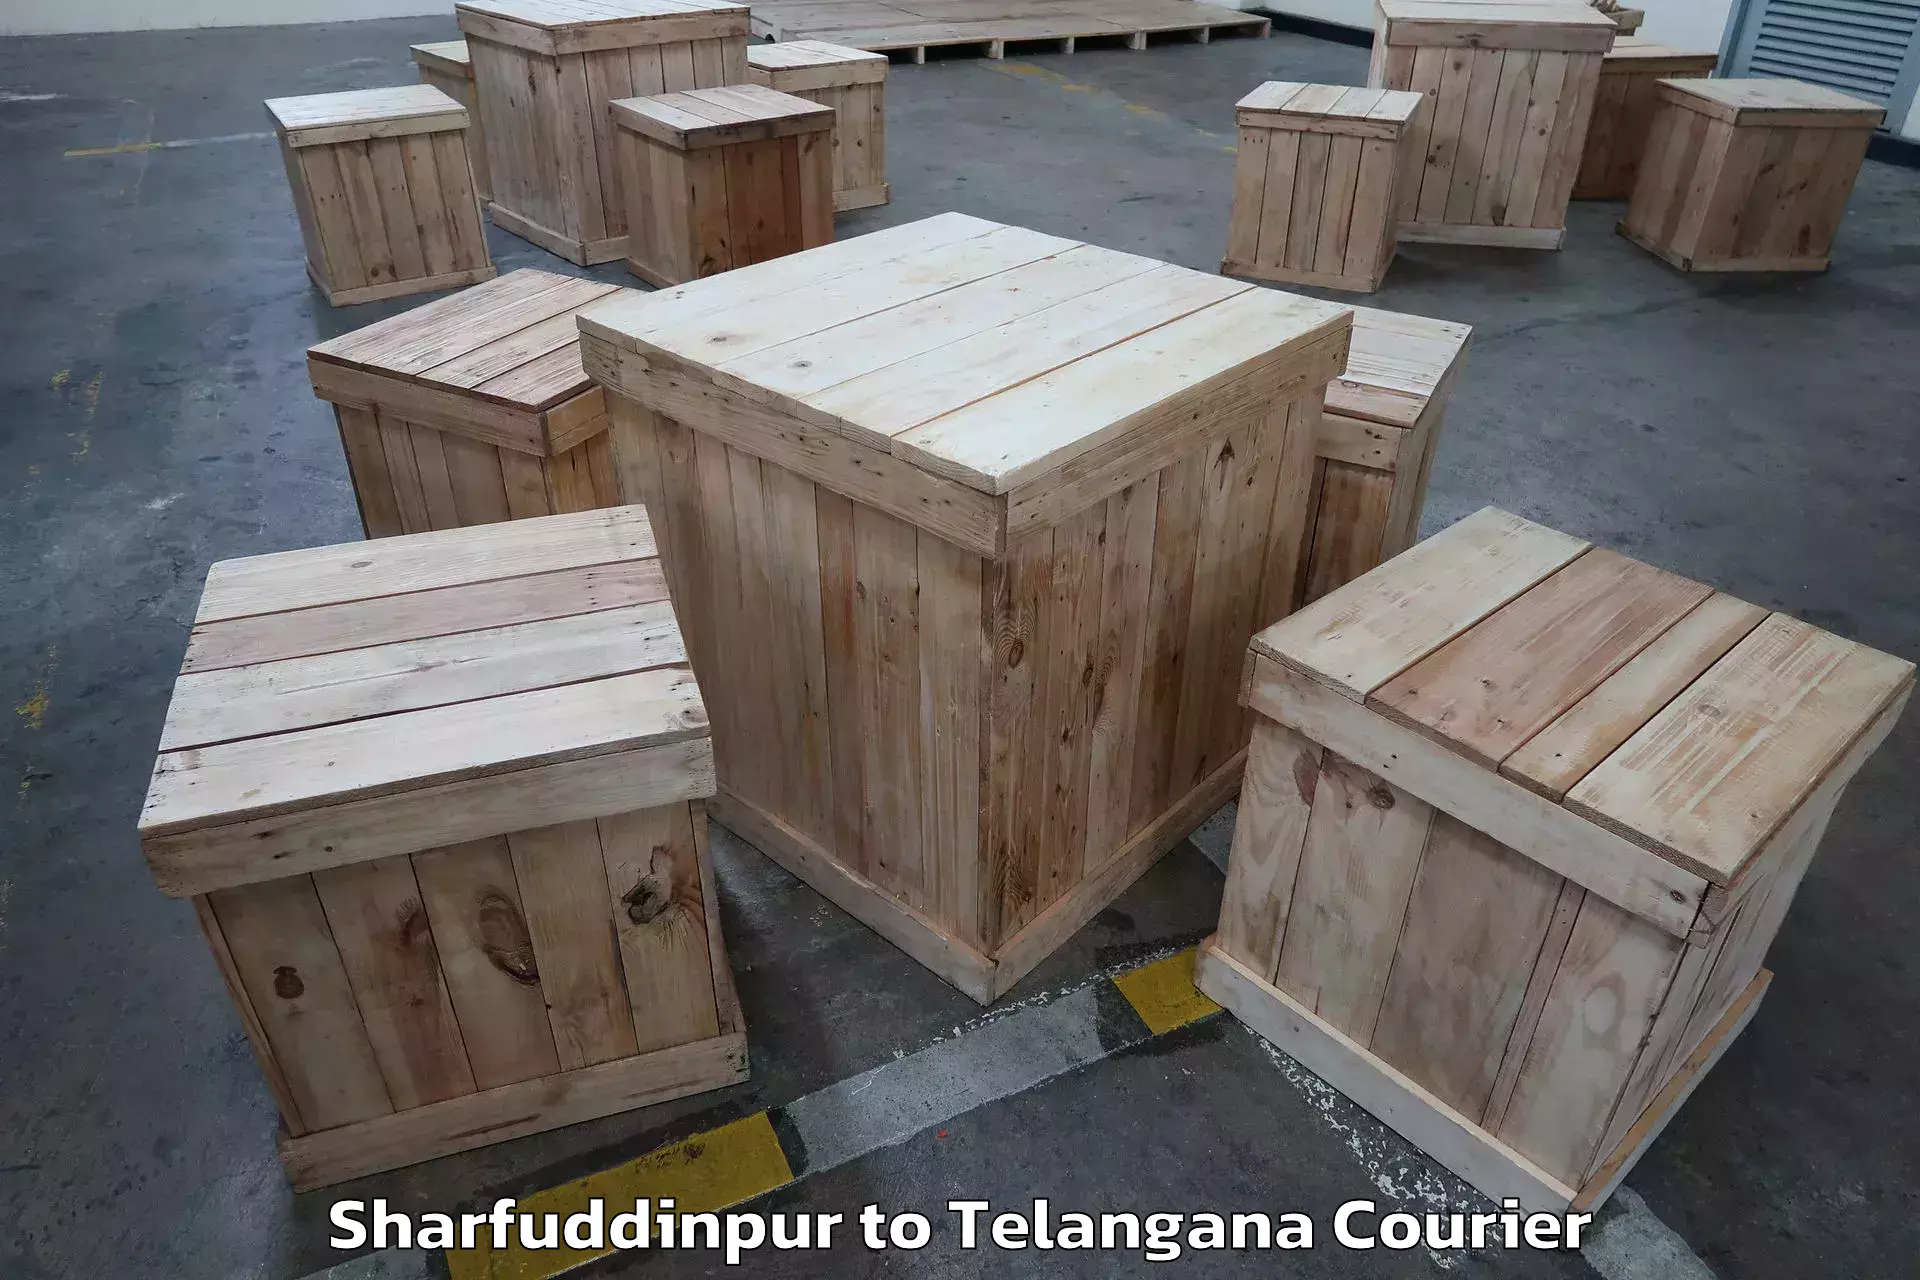 Efficient packing and moving Sharfuddinpur to Yellareddy